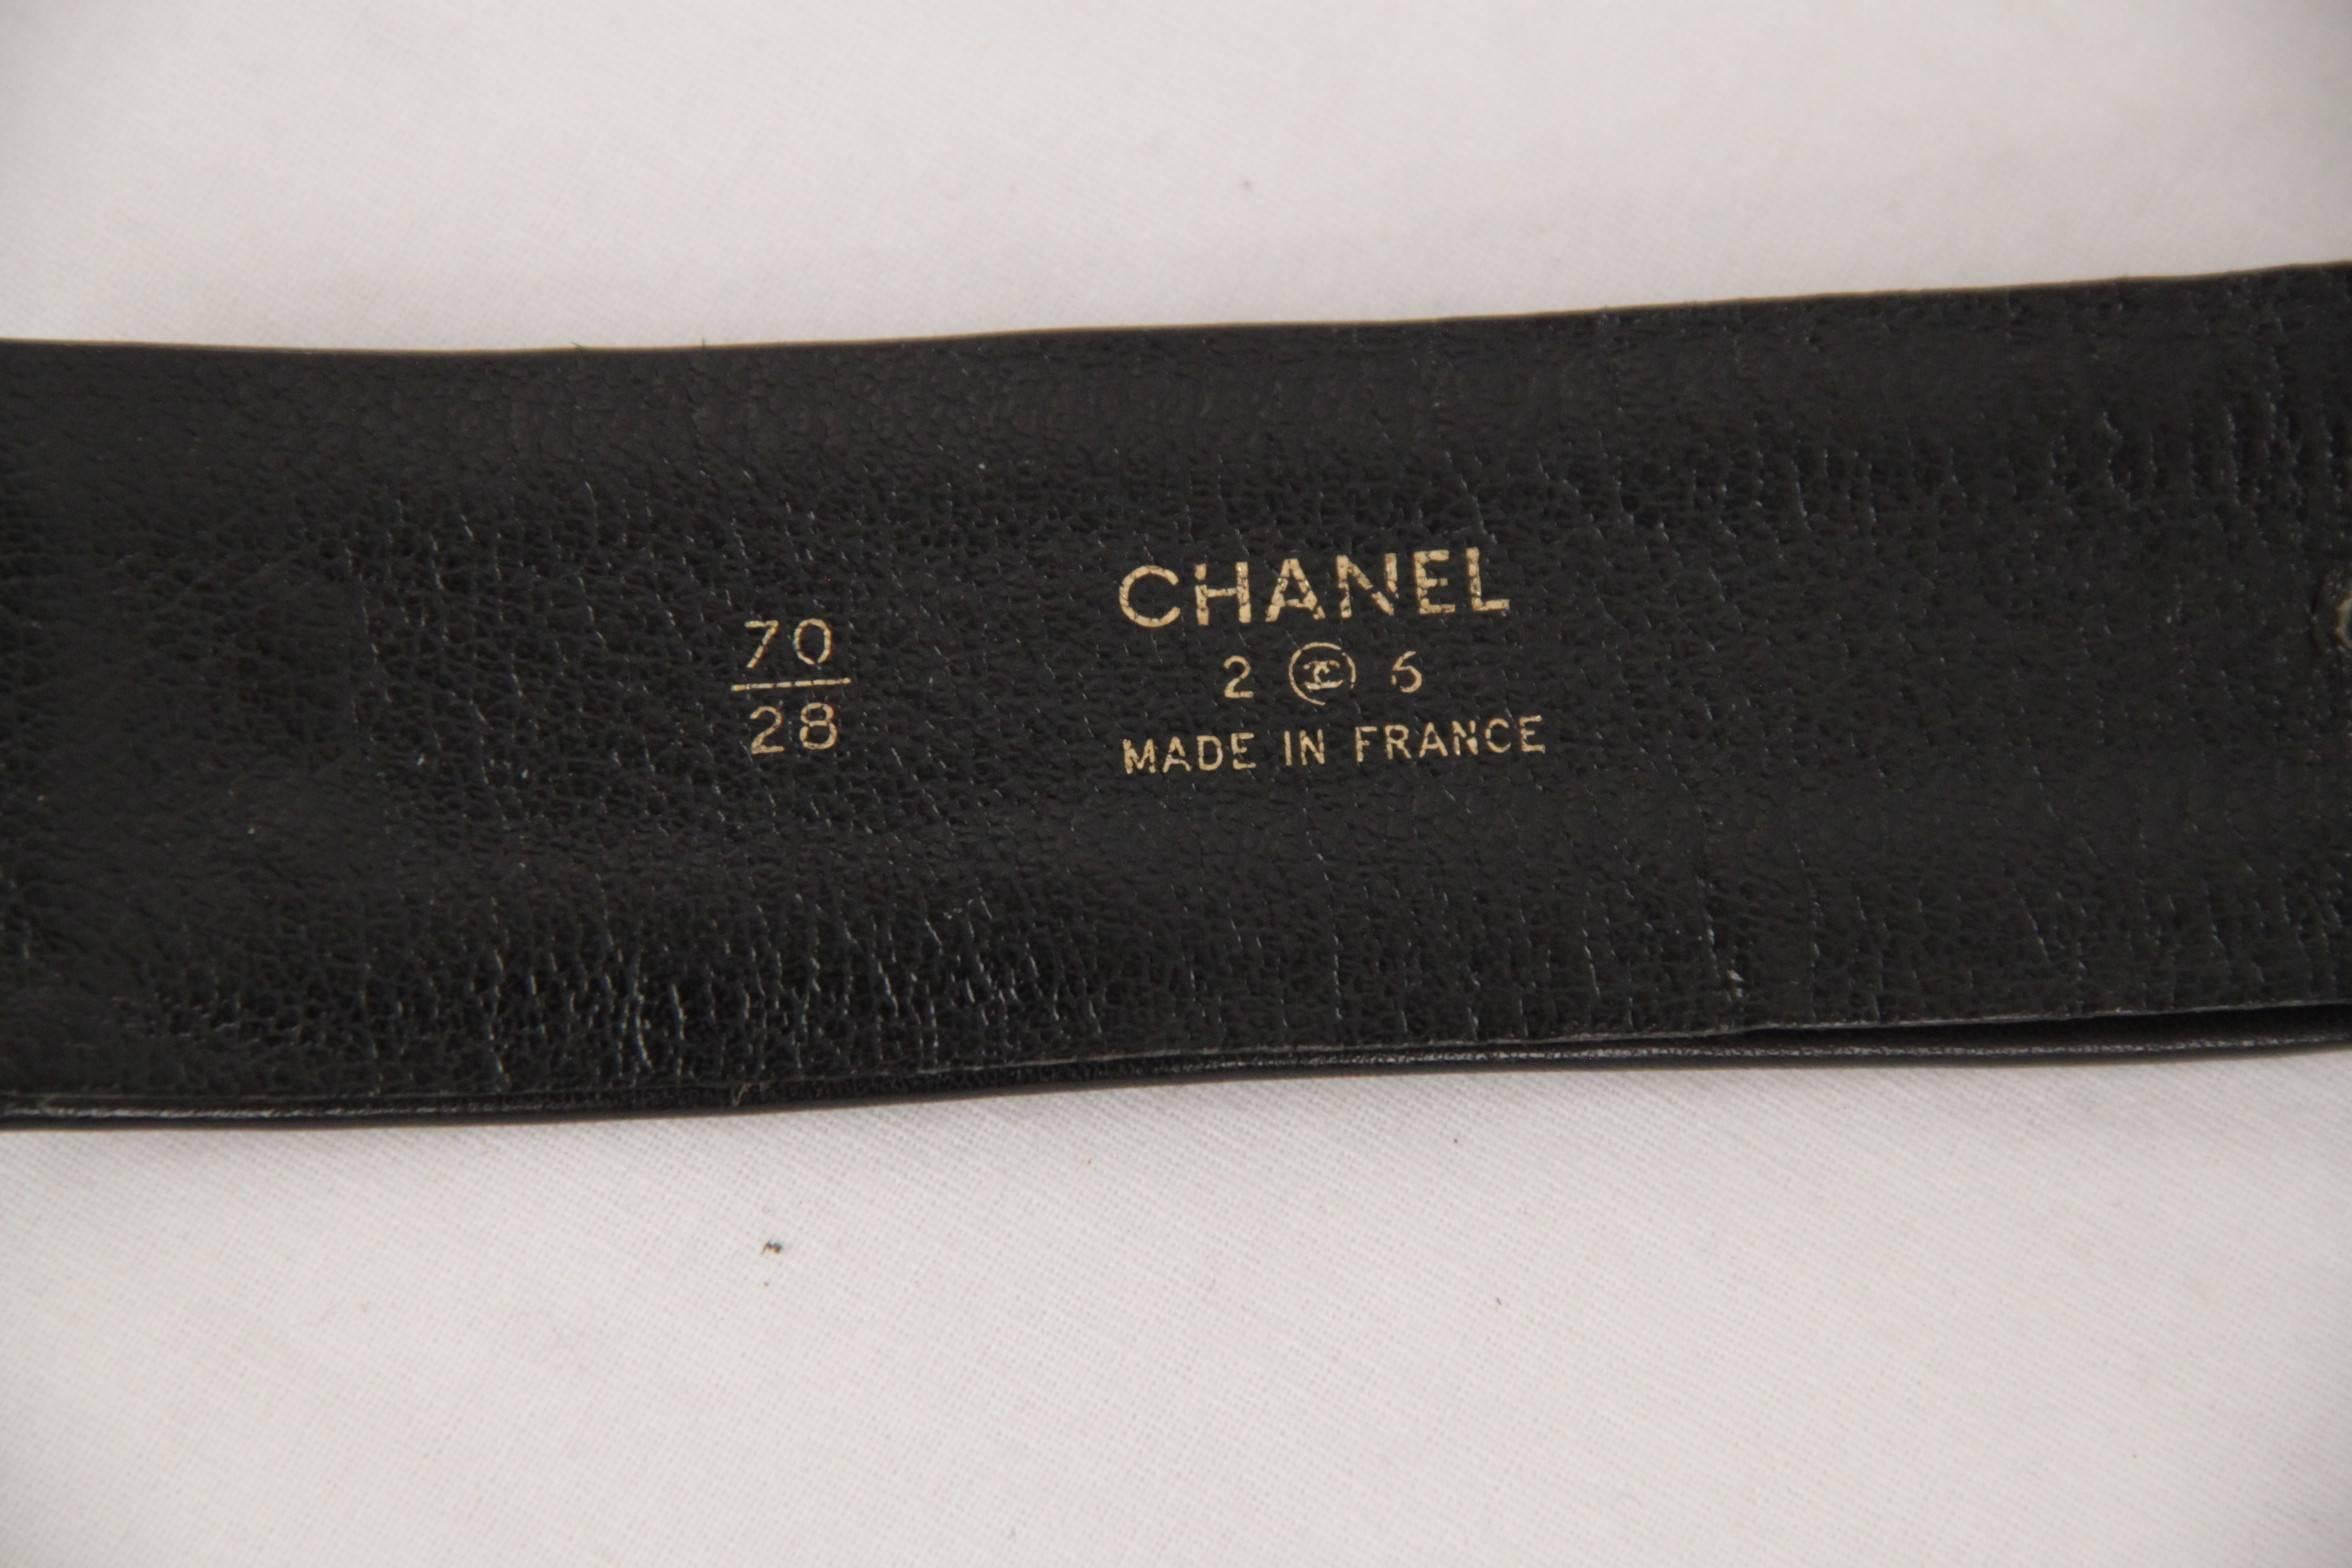 Women's Chanel Vintage Gold Metal and Black Leather Belt CC Logo Chain Buckle Size 70/28